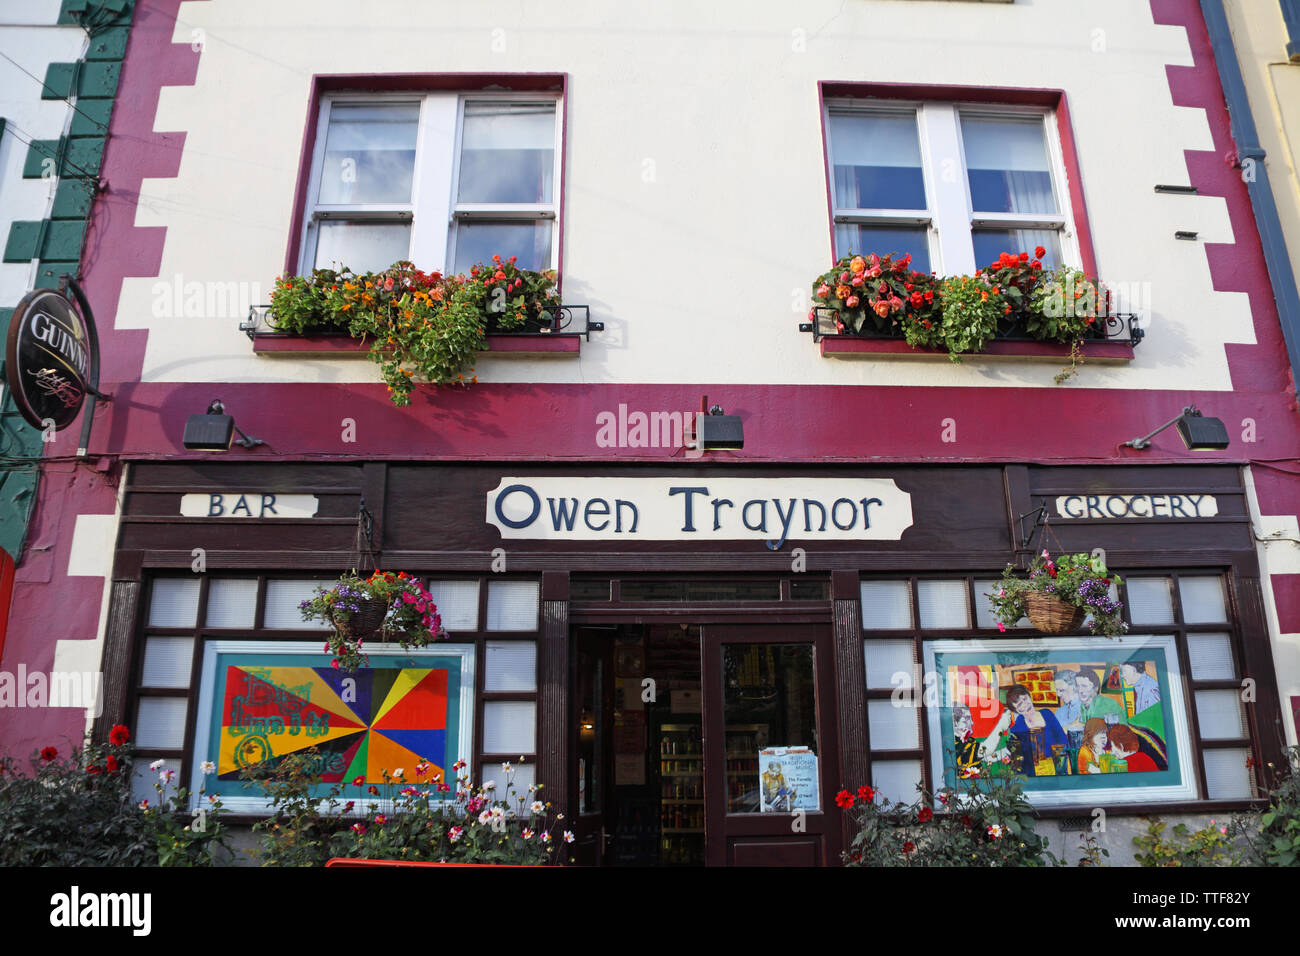 Quaint old grocery shop with a bar inside, Oldcastle, County Meath, Leinster  Province, Ireland Stock Photo - Alamy